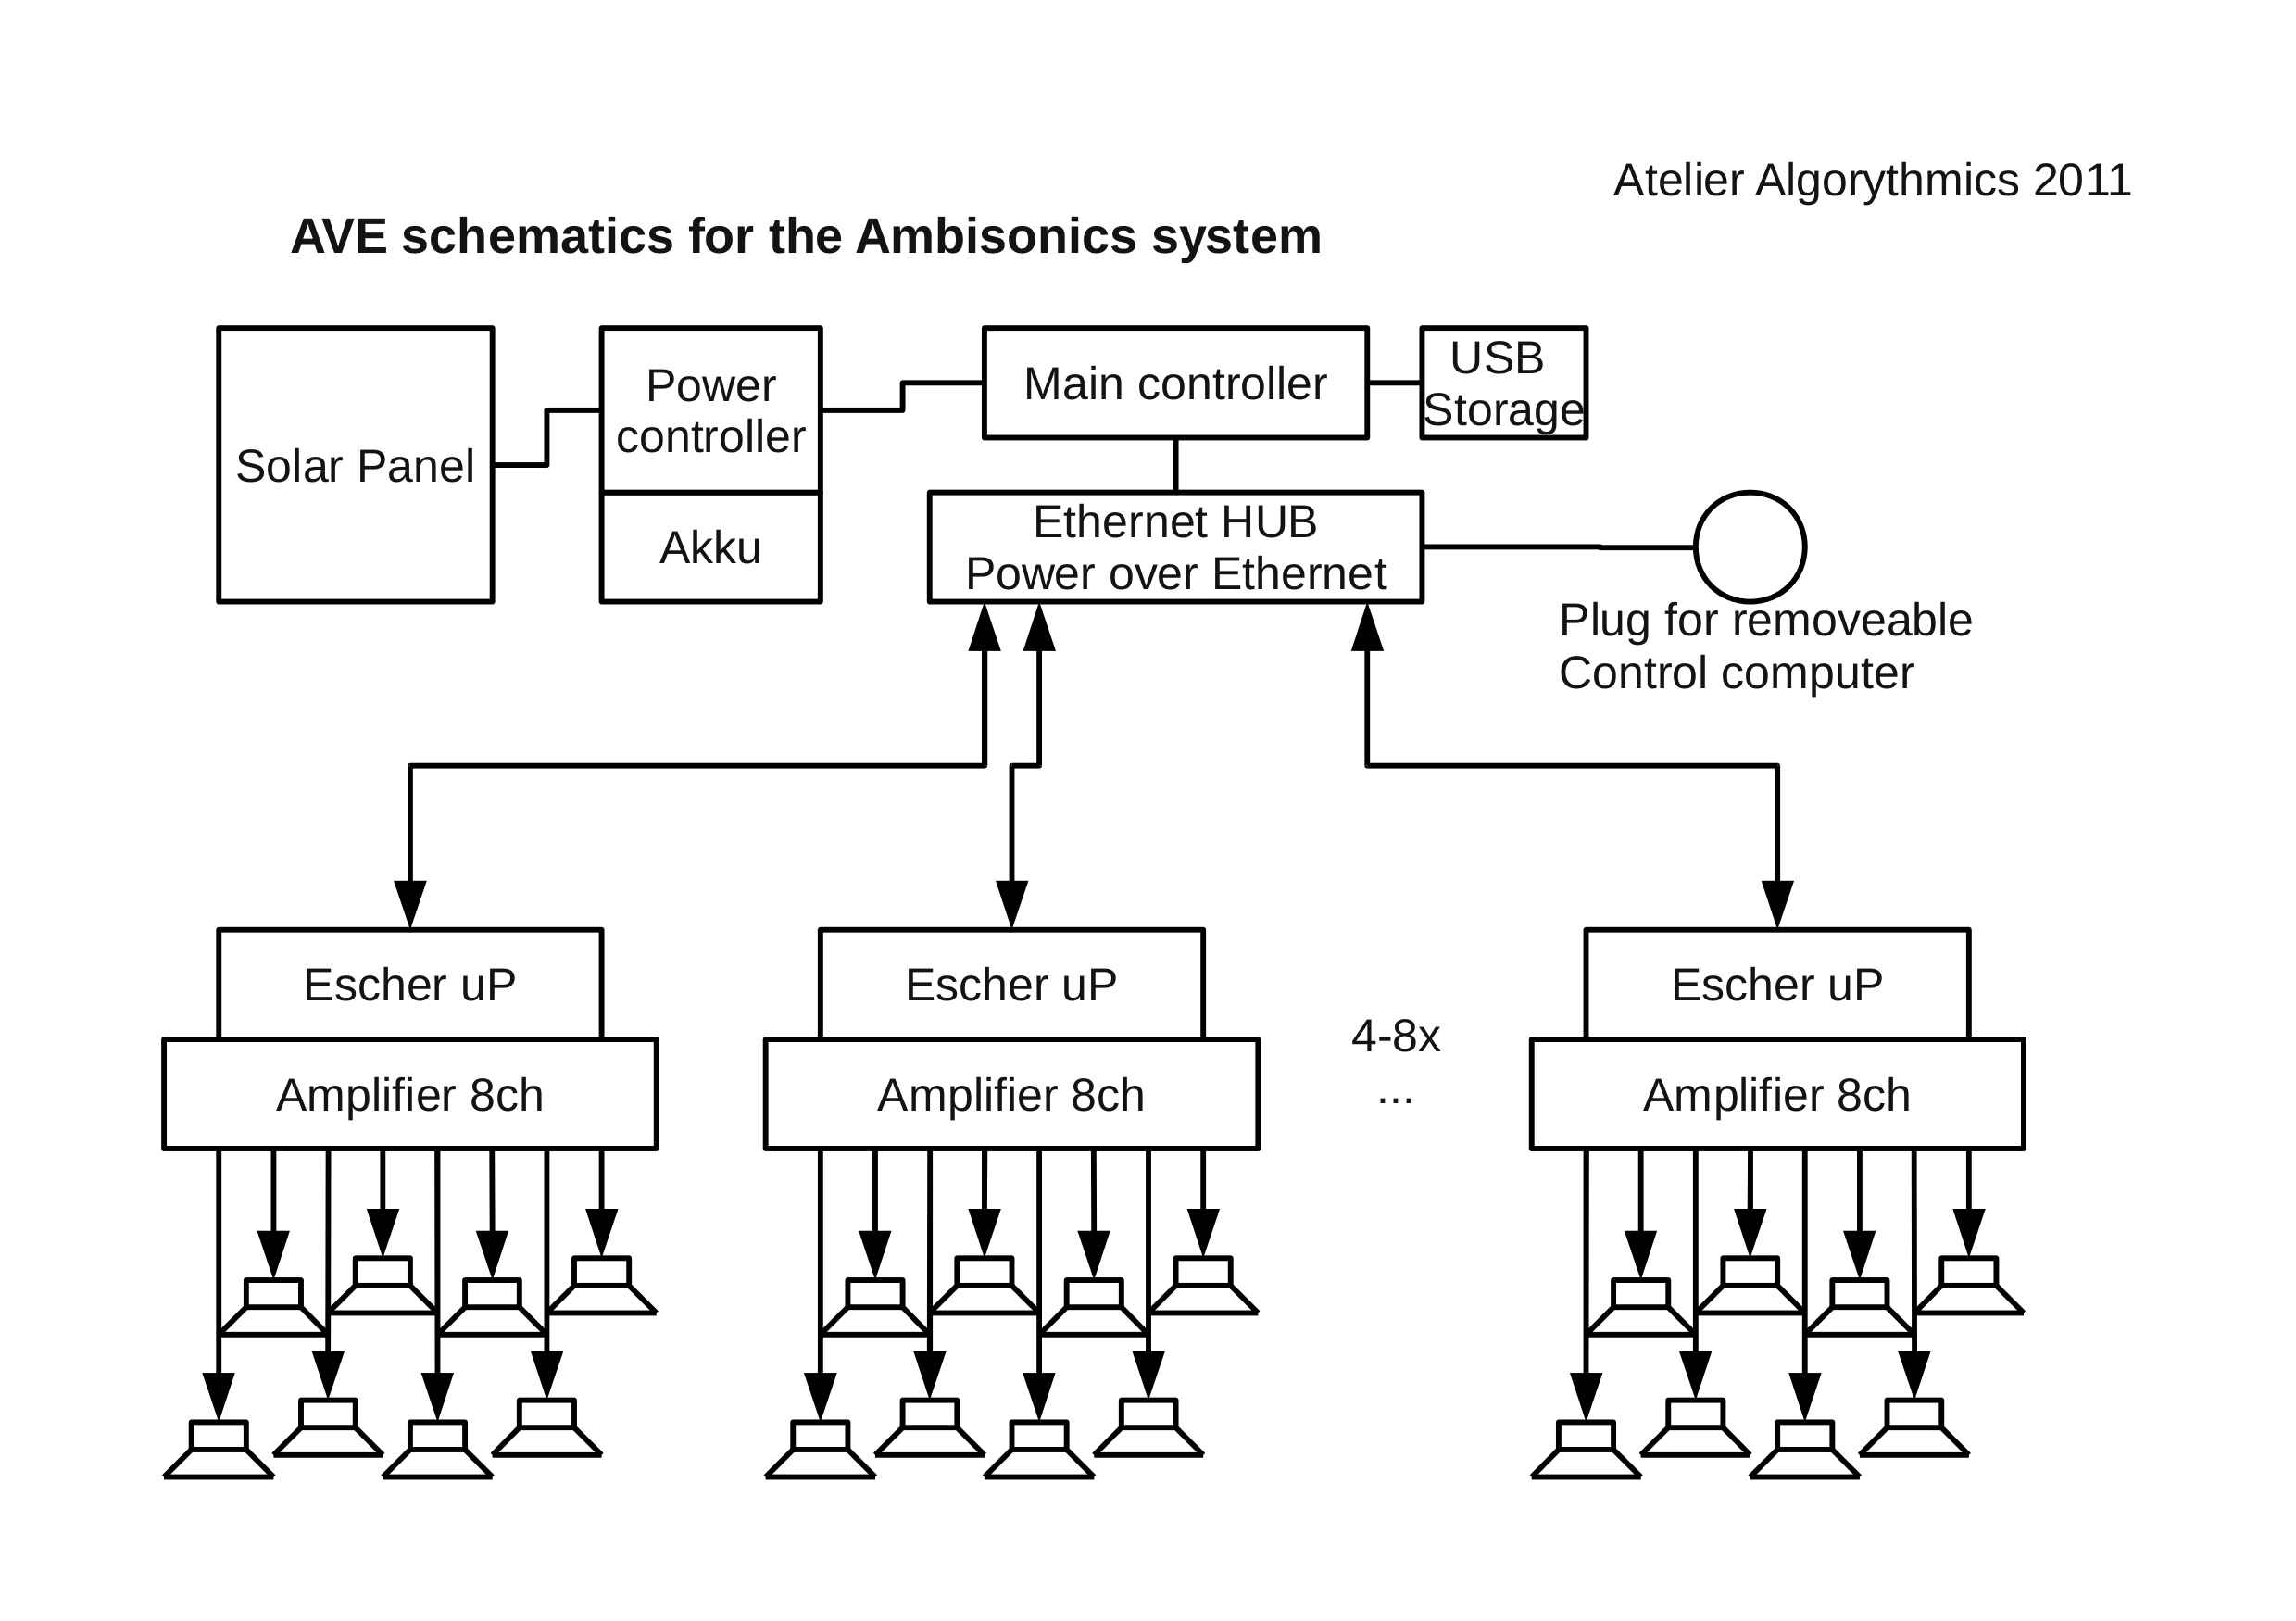 schematic of the audio system for the full implementation